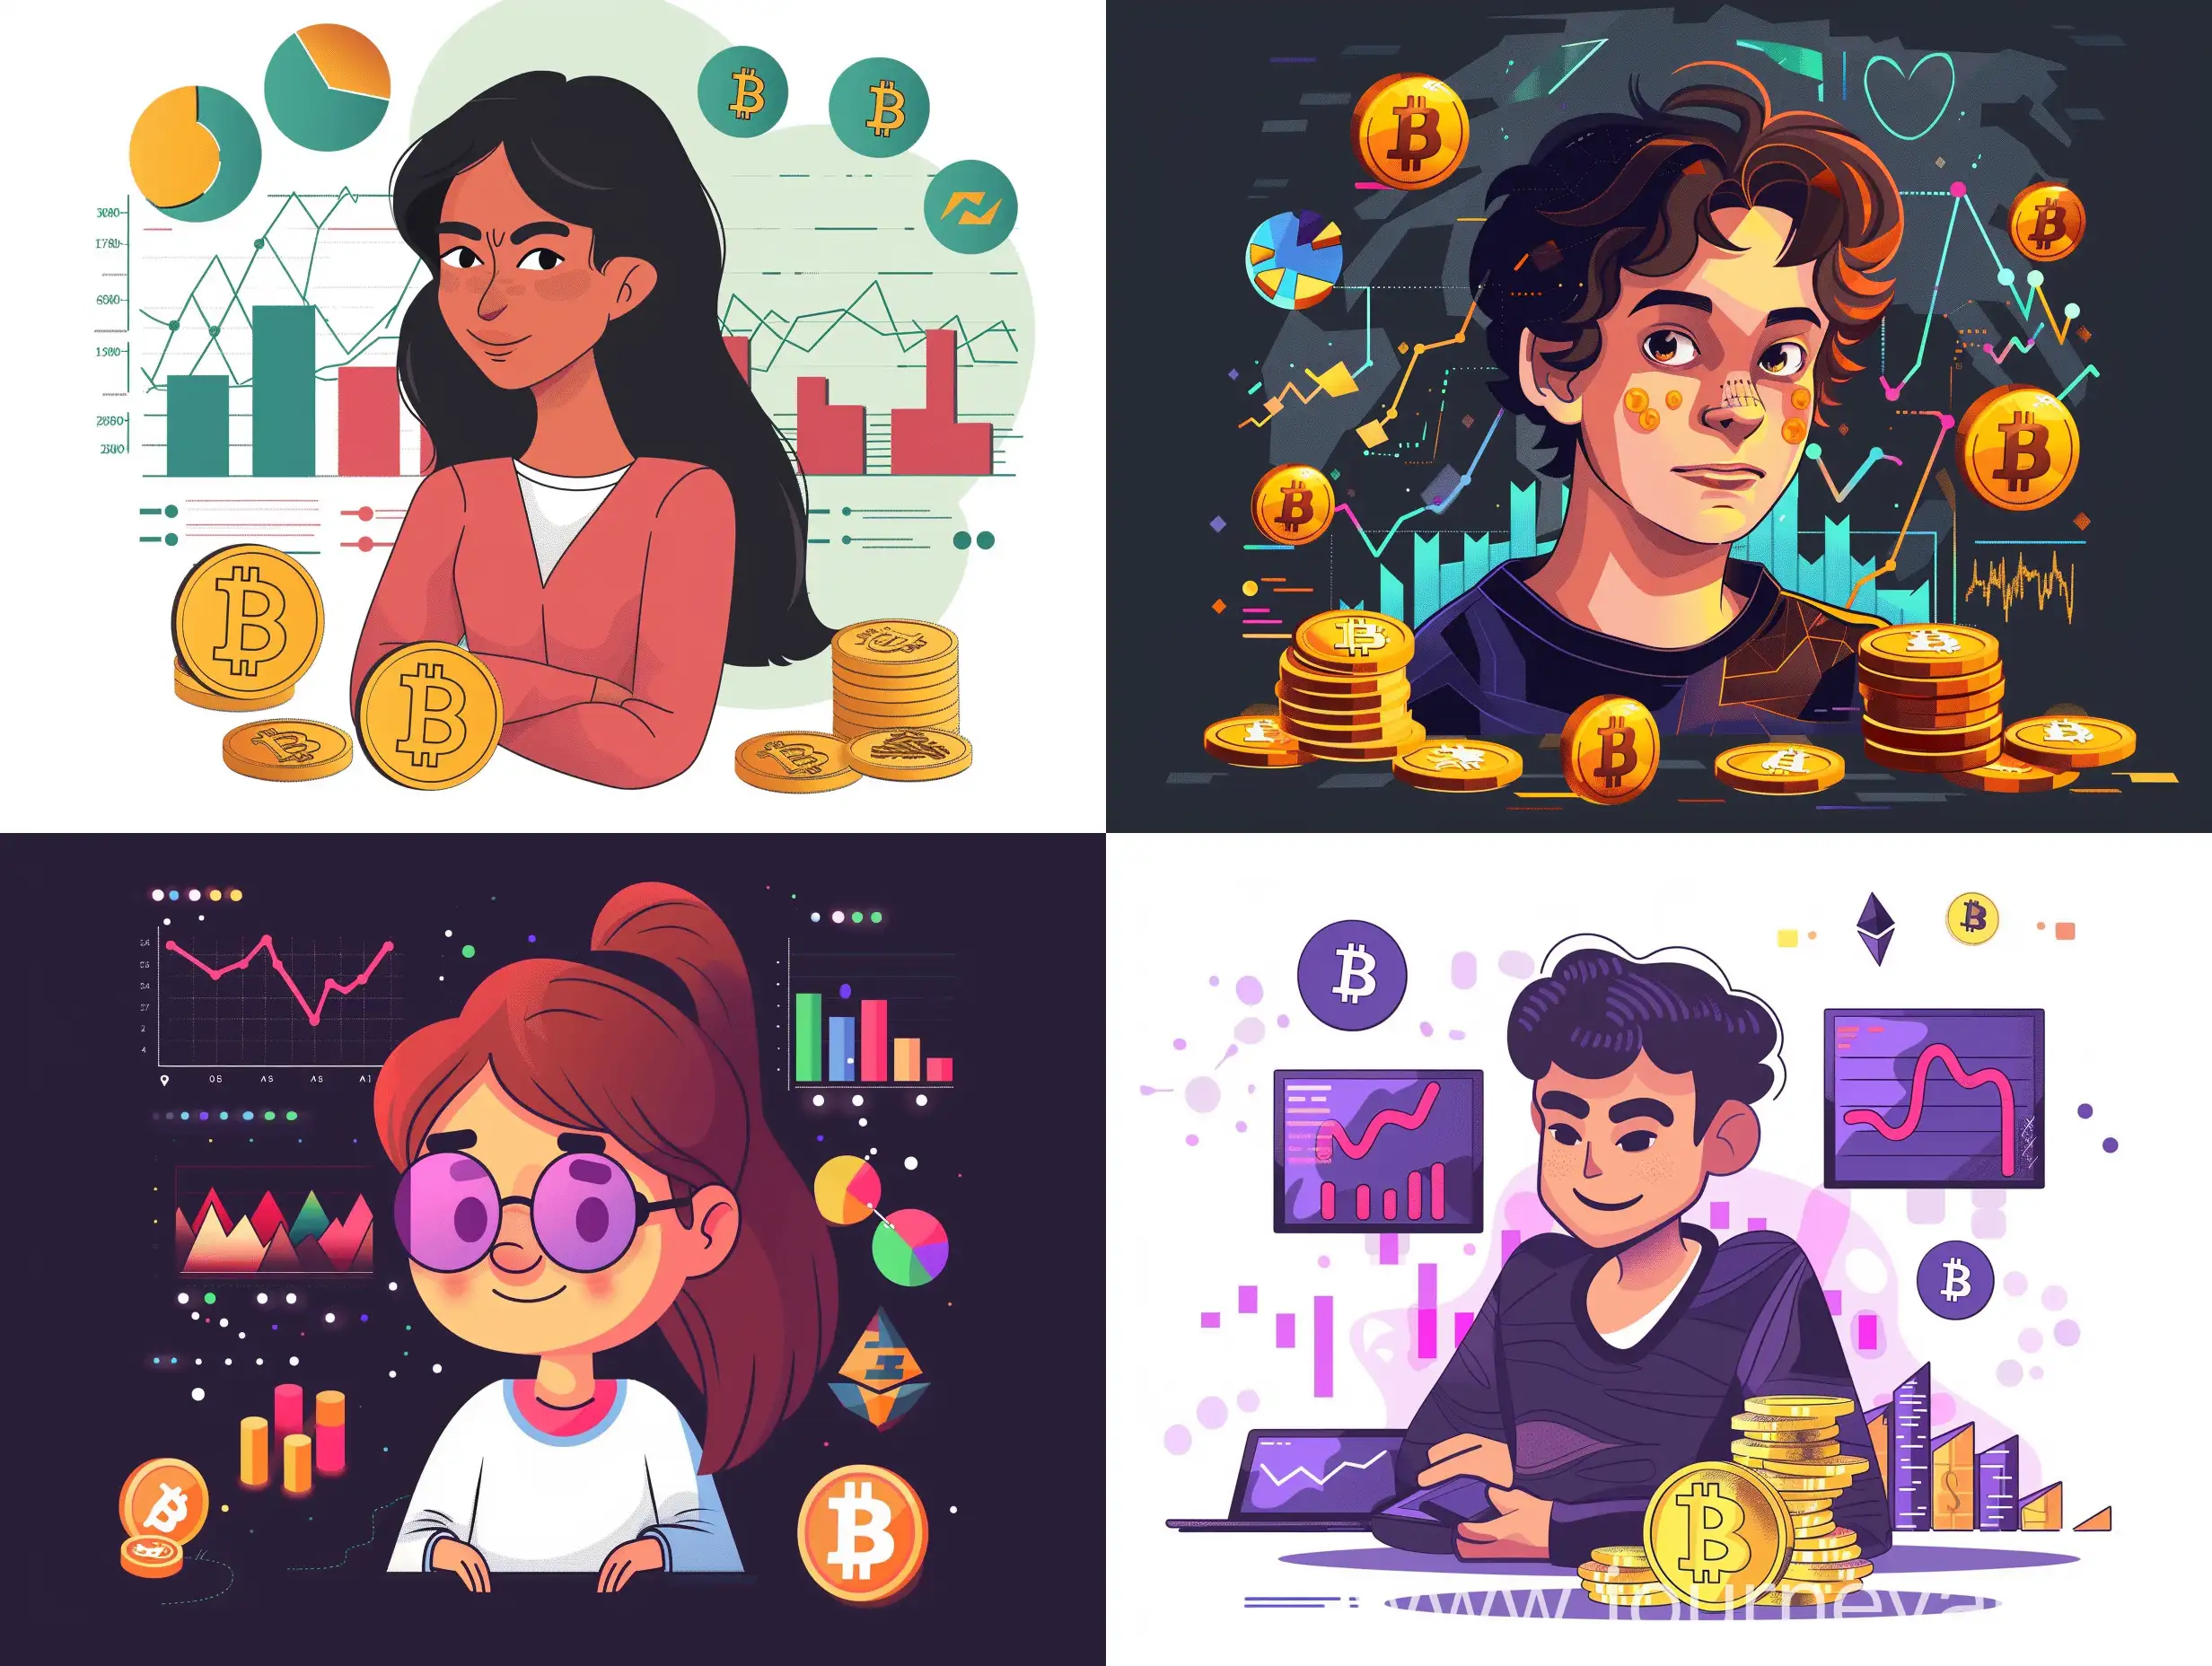 Dynamic-Crypto-Currency-Group-Avatar-with-Graphs-Coins-and-Games